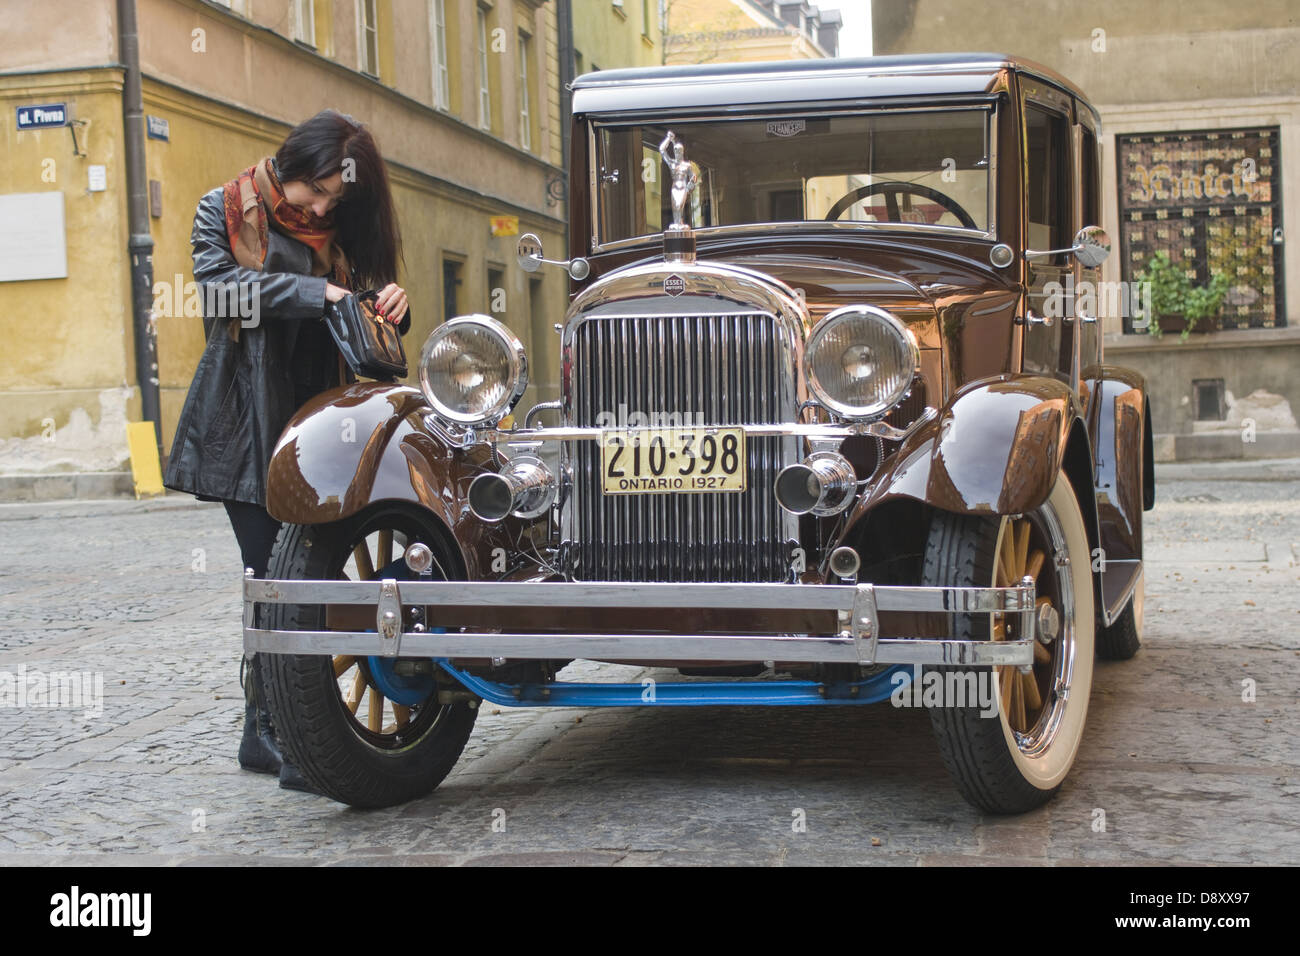 Oldtimer car Essex Super Six and young woman on Old Town in Warsaw, Poland Stock Photo